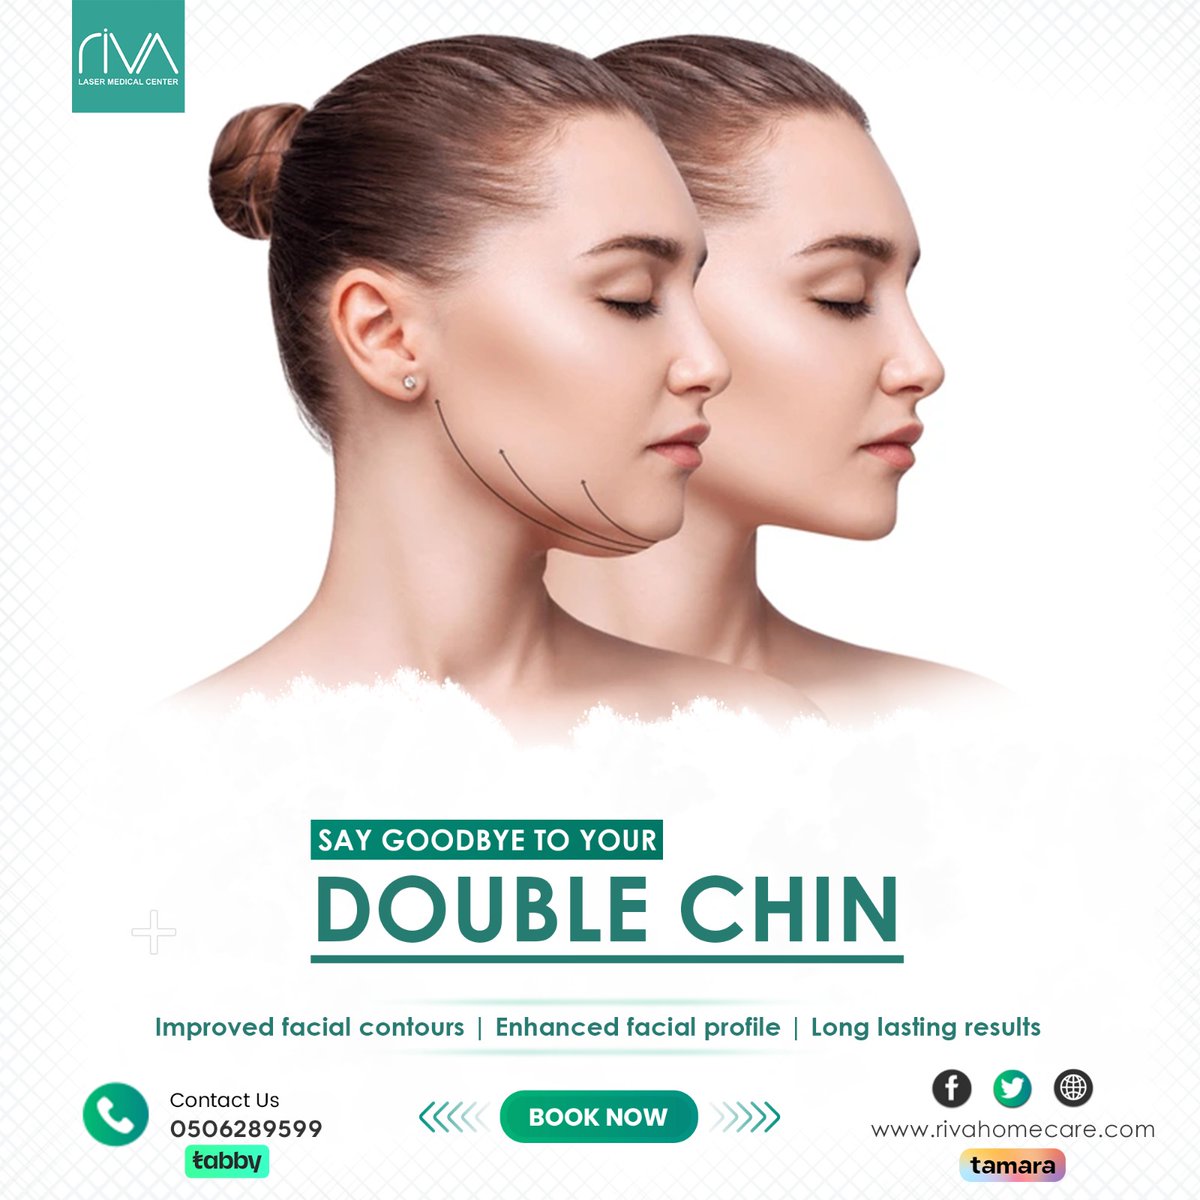 ✨ Say Goodbye to Double Chin with Our Advanced Treatment! ✨

Struggling with stubborn double chin? We've got the solution for you! 💫

Experience the transformative power of our Double Chin Treatment at Riva Laser Medical Center.
#DoubleChinTreatment #DefinedJawline #Confident